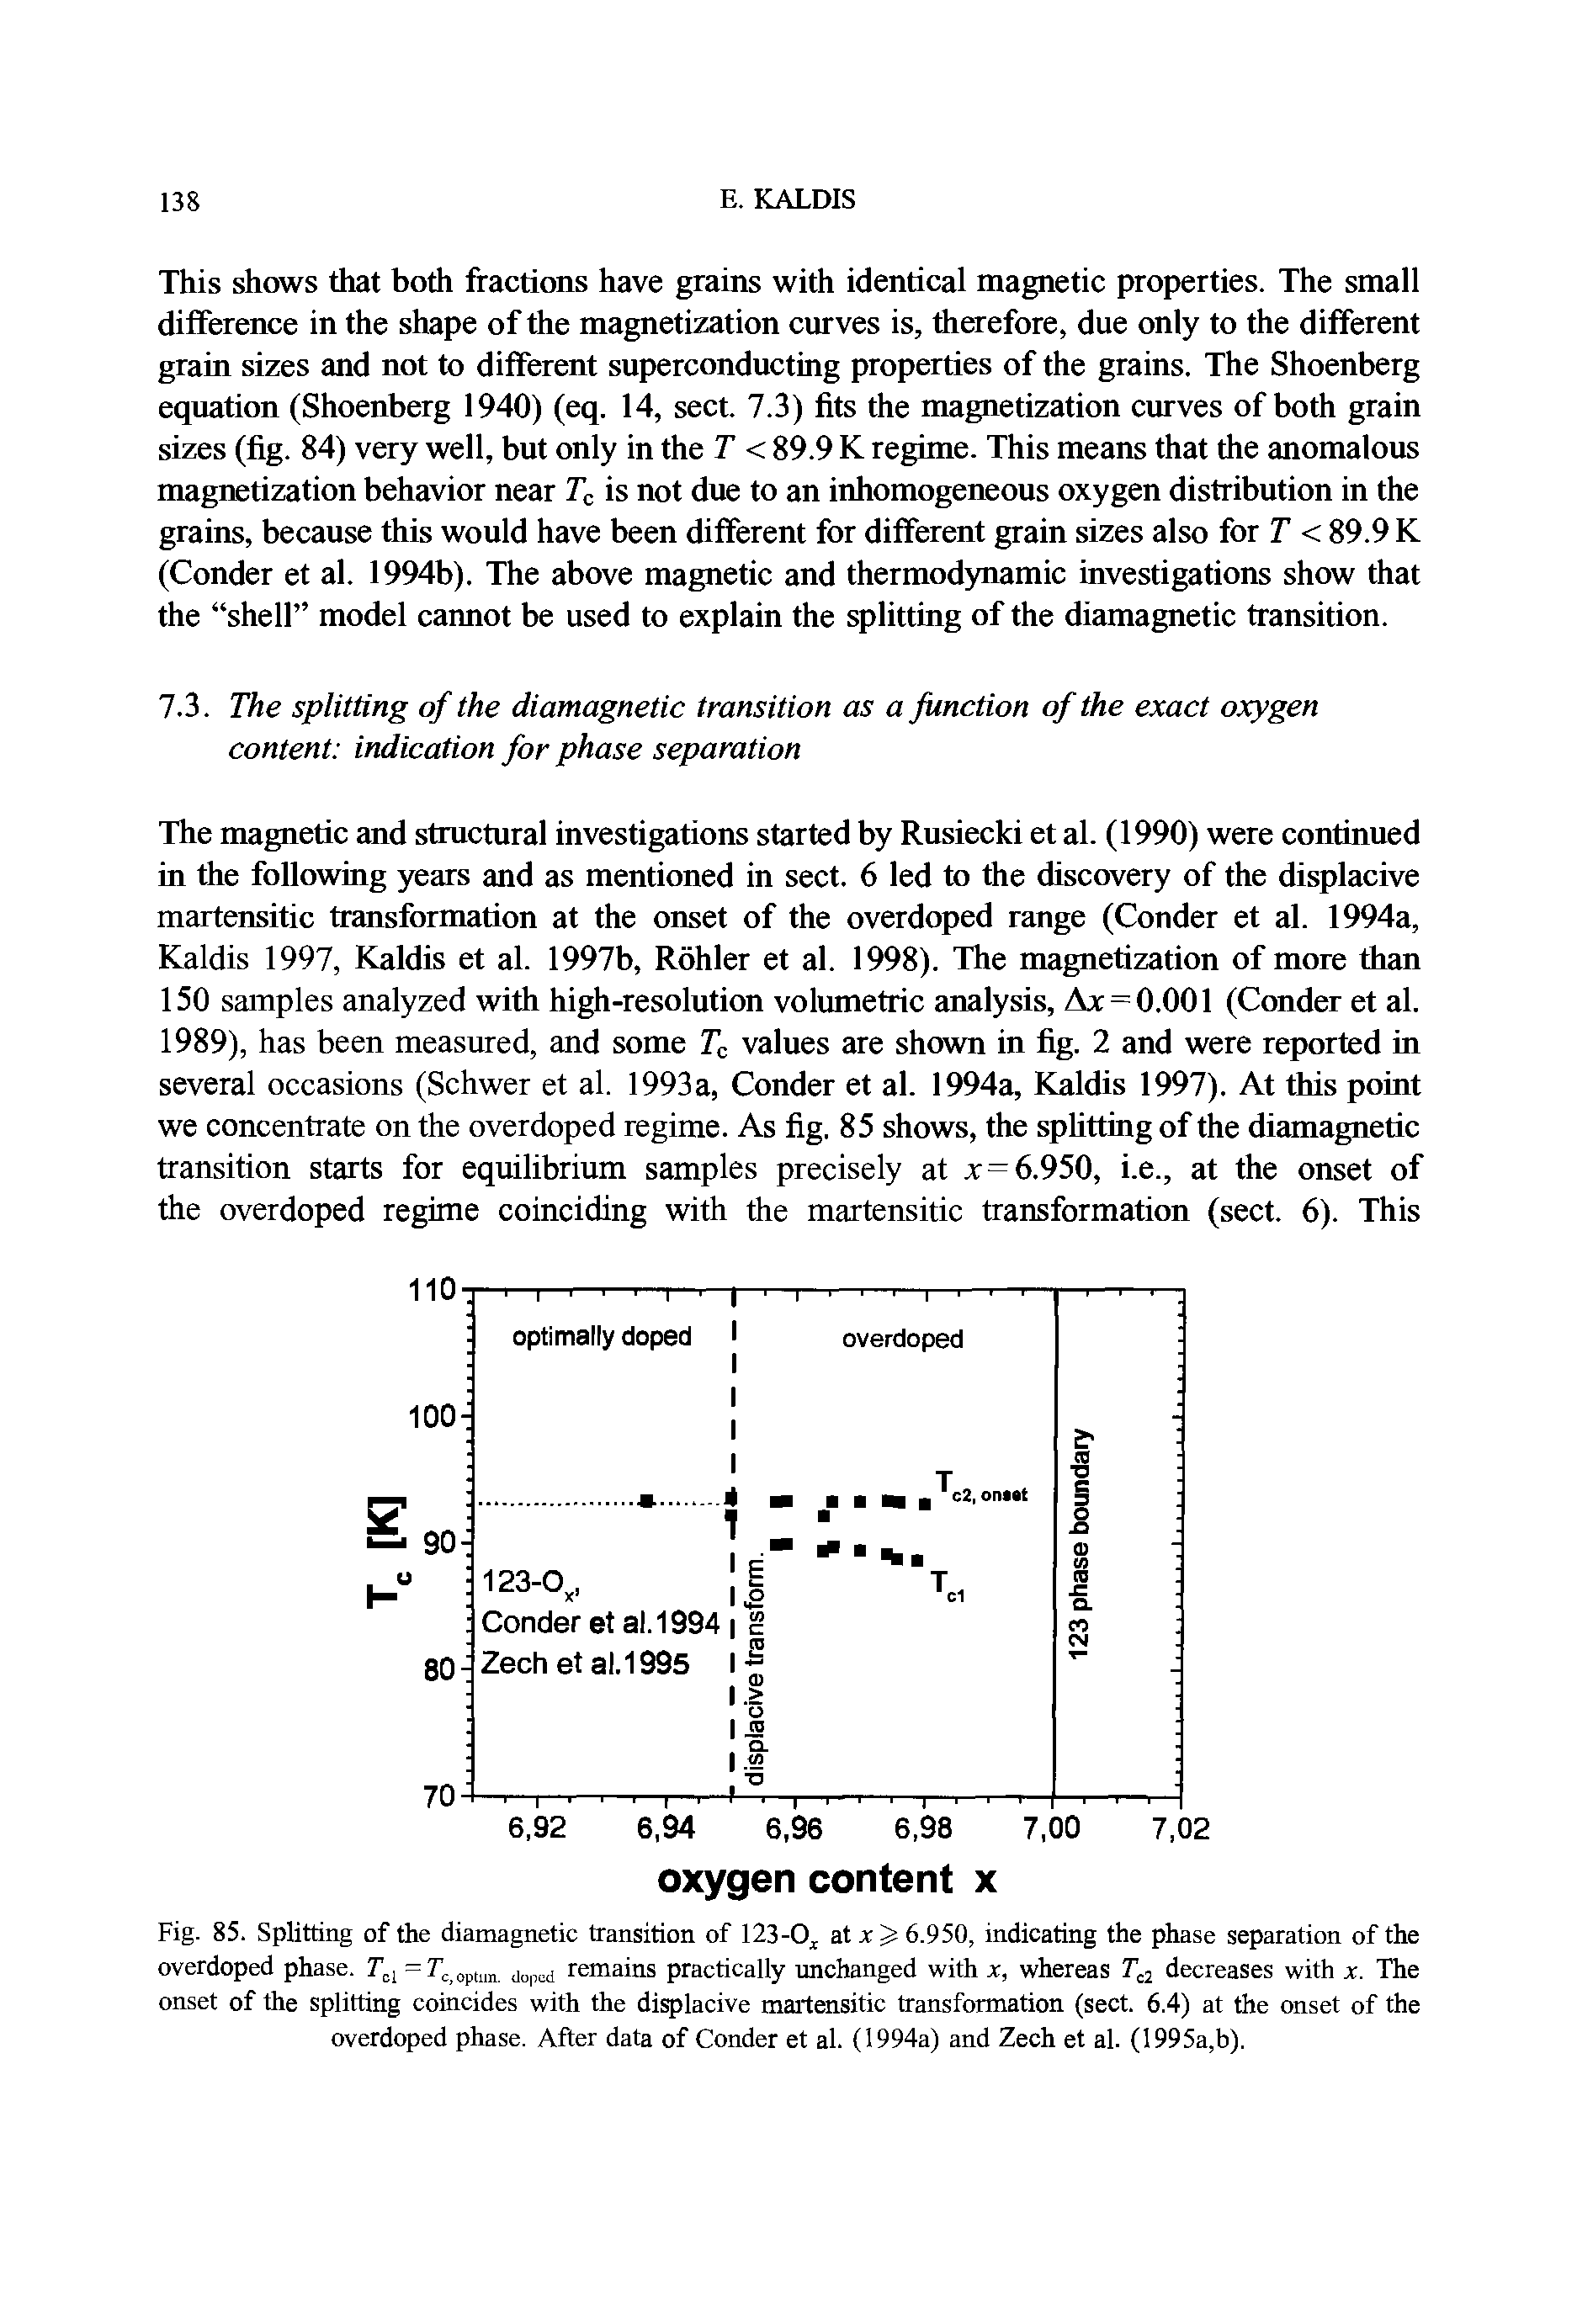 Fig. 85. Splitting of the diamagnetic transition of 123-0, at a > 6.950, indicating the phase separation of the overdoped phase. = 71 p, remains practically unchanged with x, whereas decreases with x. The onset of the splitting coincides with the displacive martensitic transformation (sect. 6.4) at the onset of the overdoped phase. After data of Conder et al. (1994a) and Zech et al. (1995a,b).